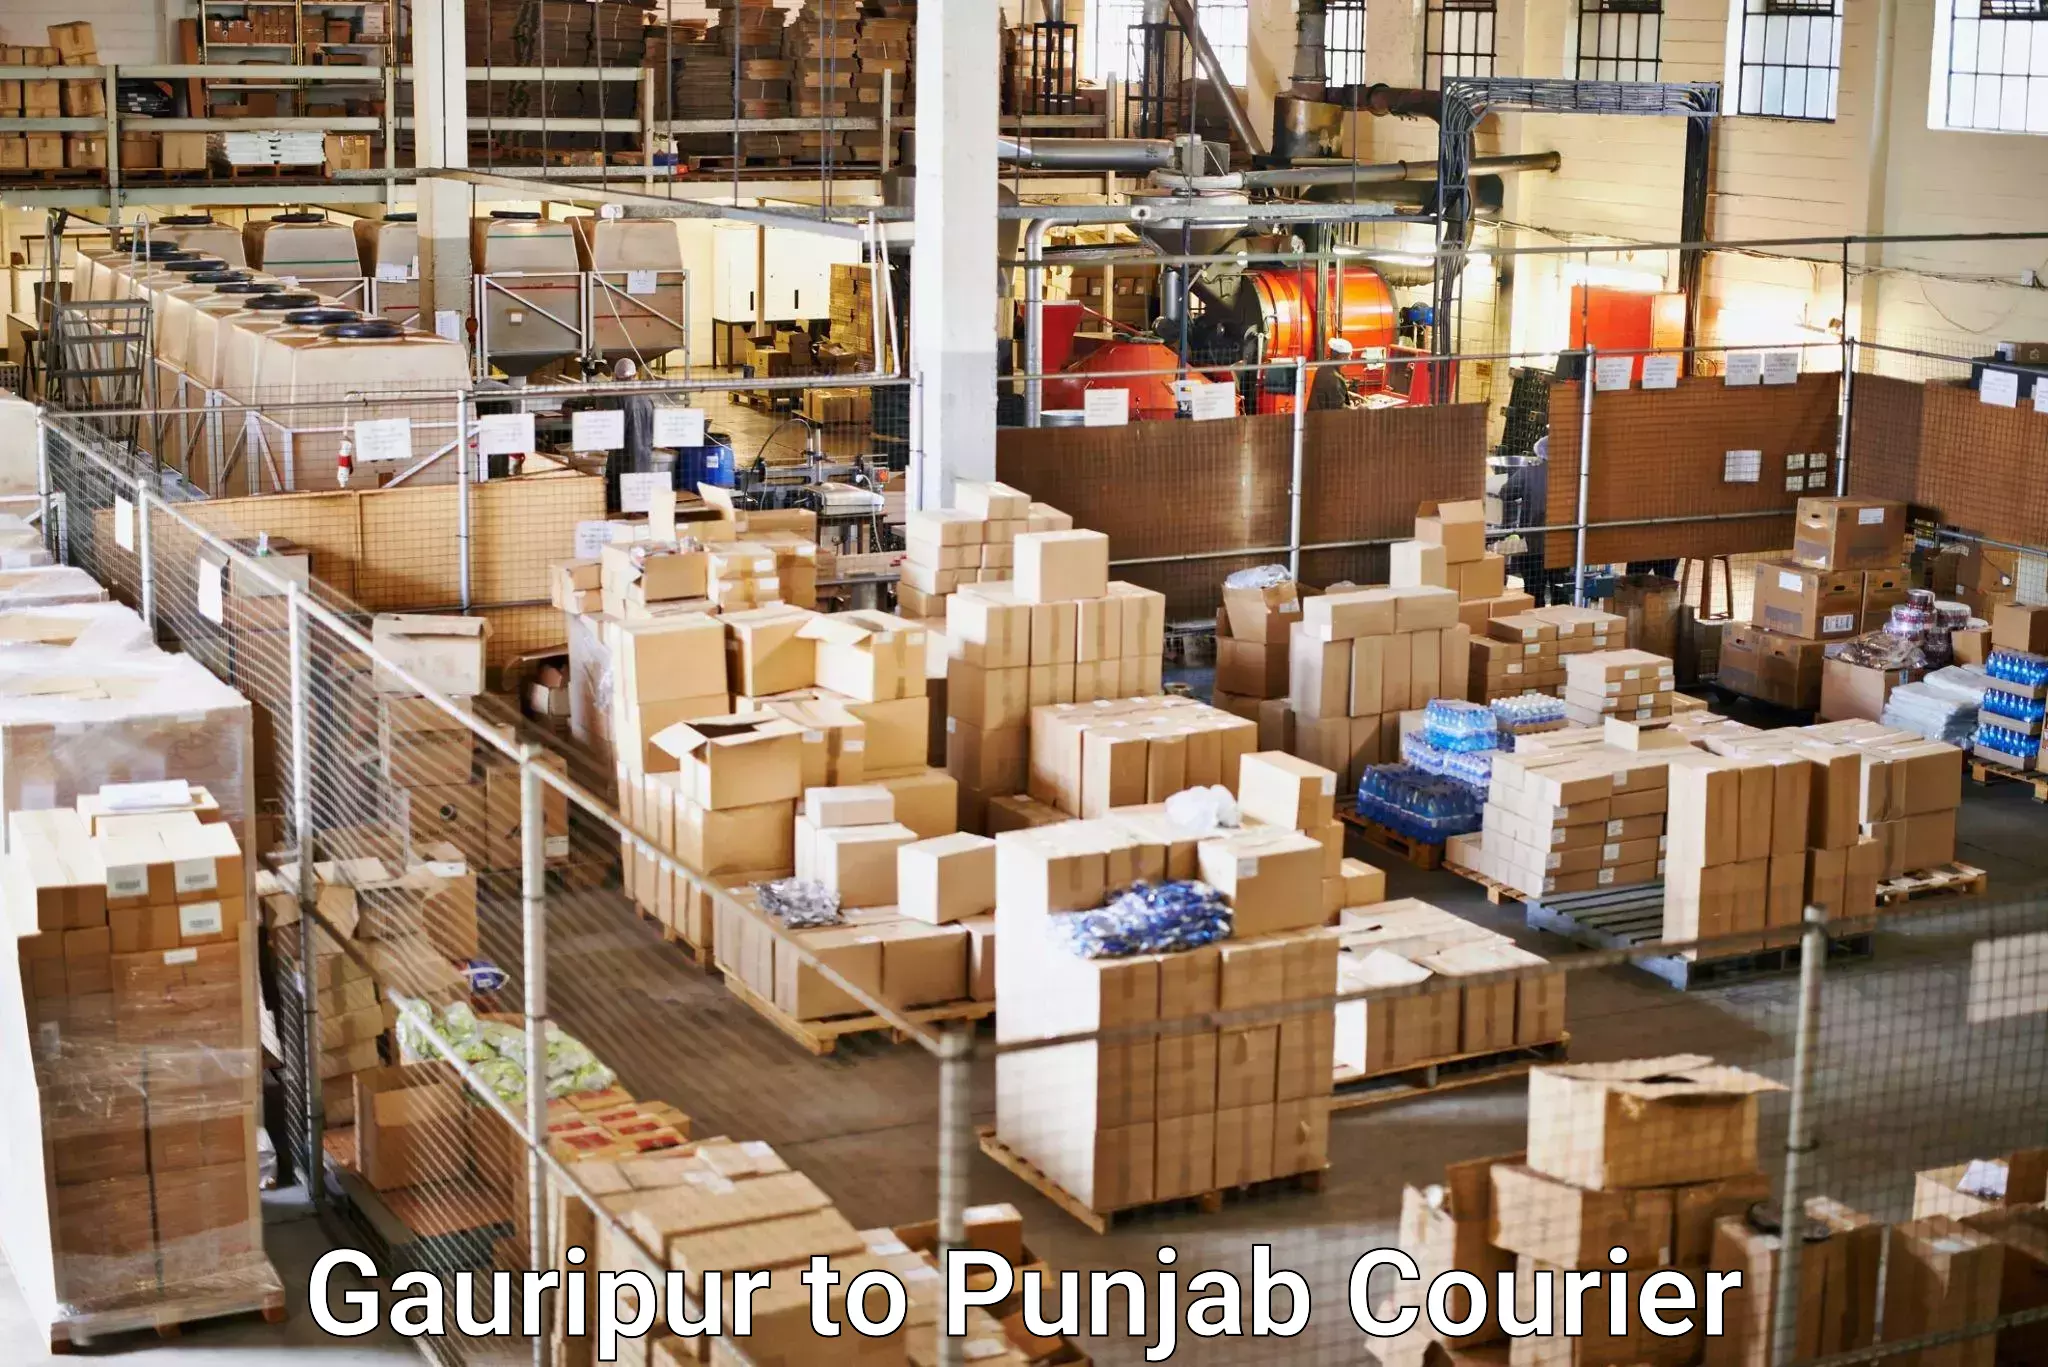 Courier rate comparison Gauripur to Dhuri